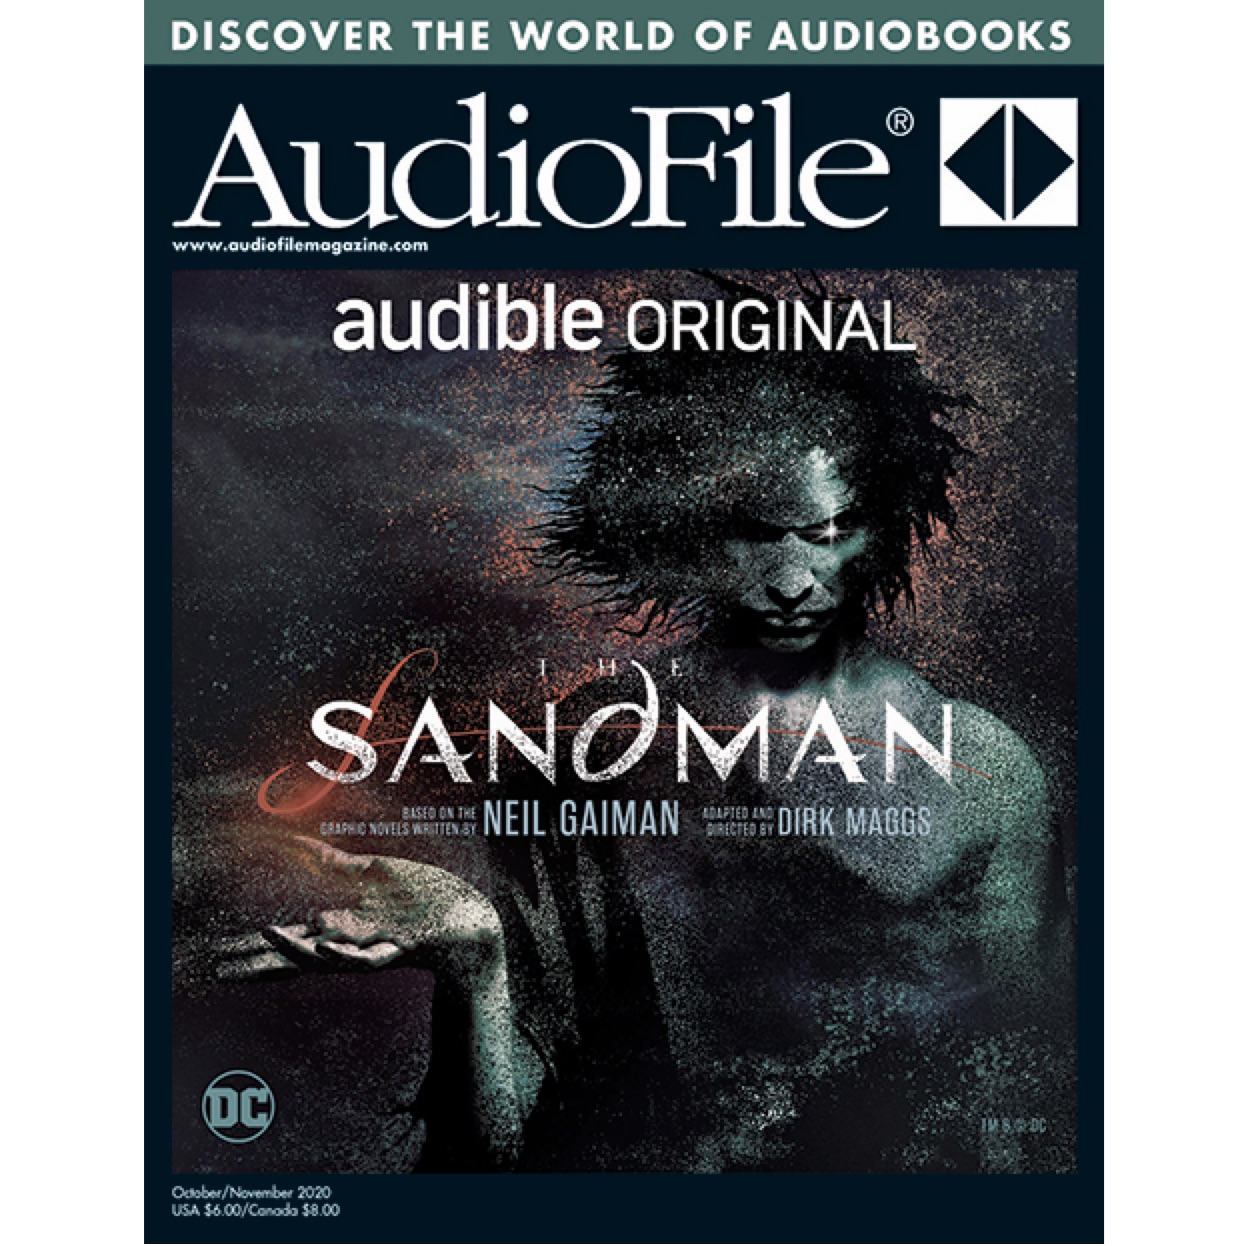 audiobook recommendations